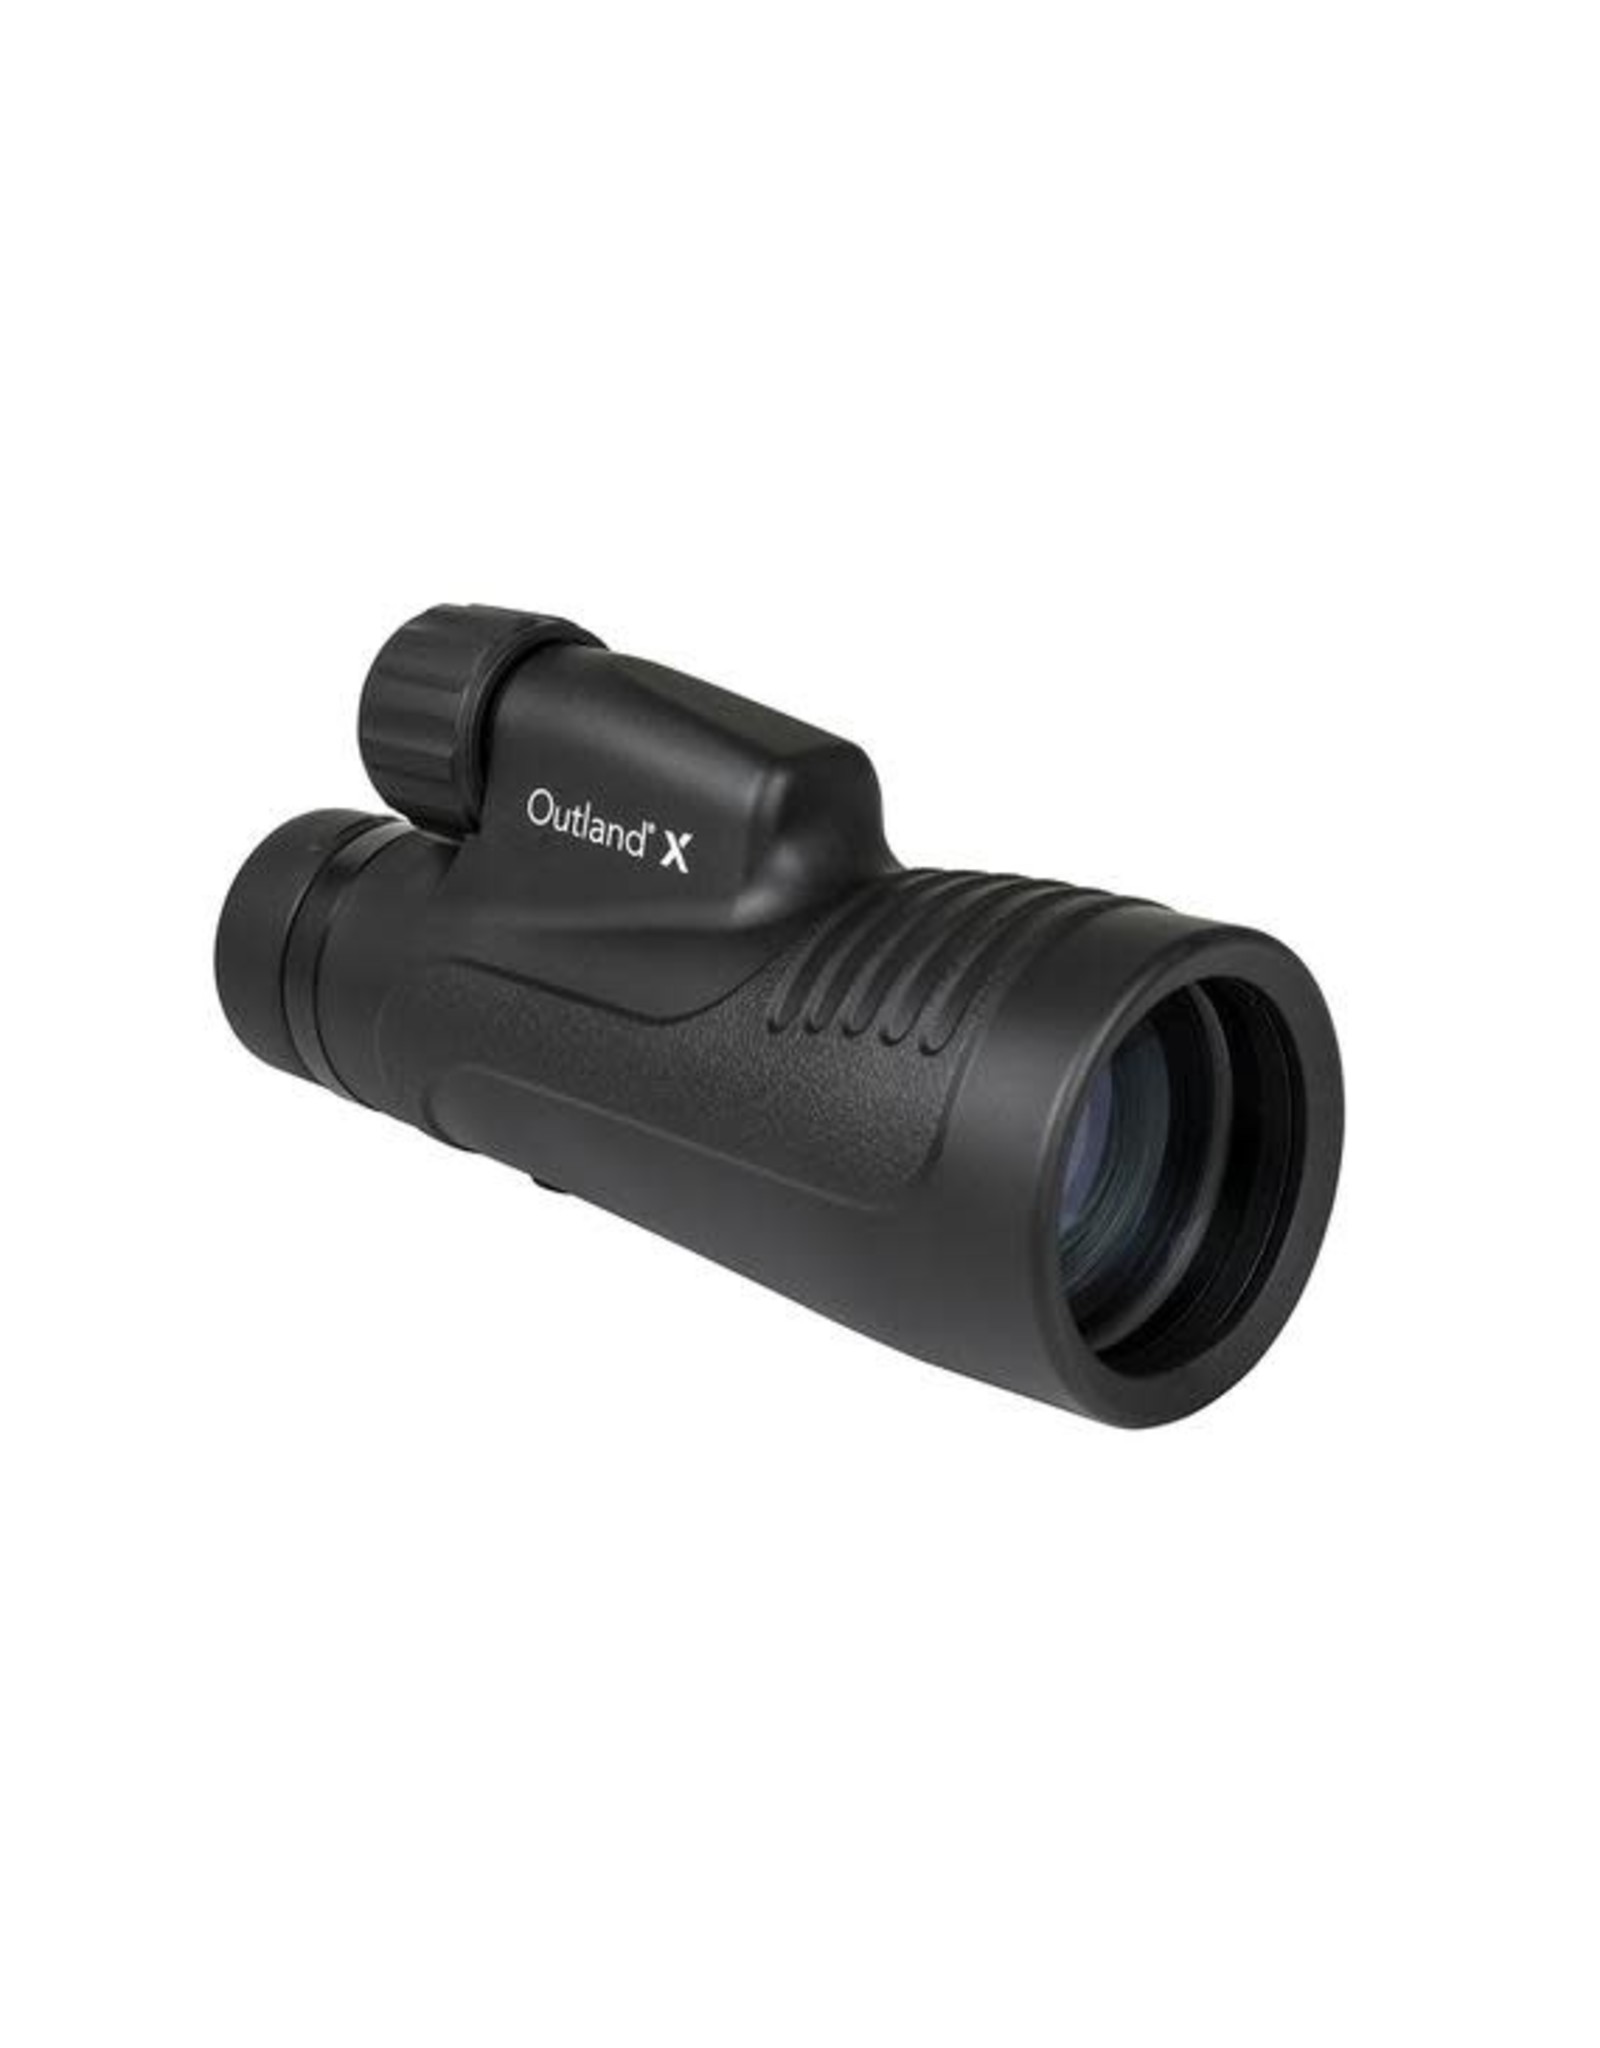 Celestron 15x50mm Outland X Monocular with Smartphone Adapter